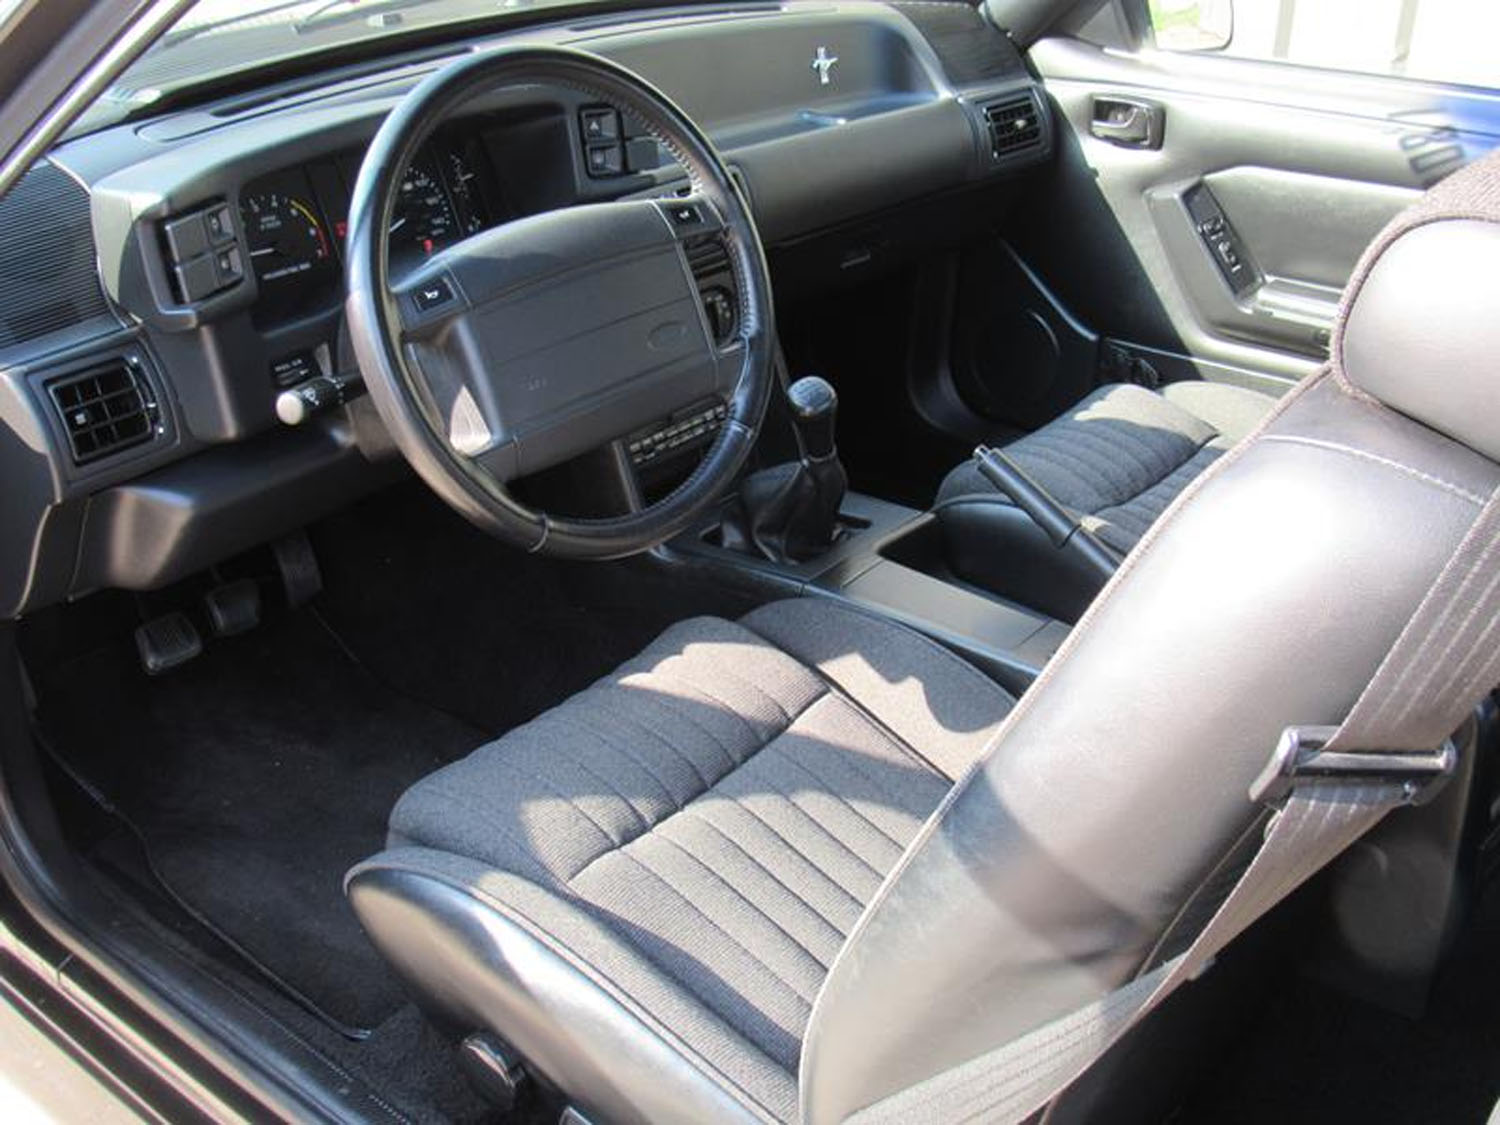 1993 Ford Mustang Cobra At Auction Has 7 800 Miles